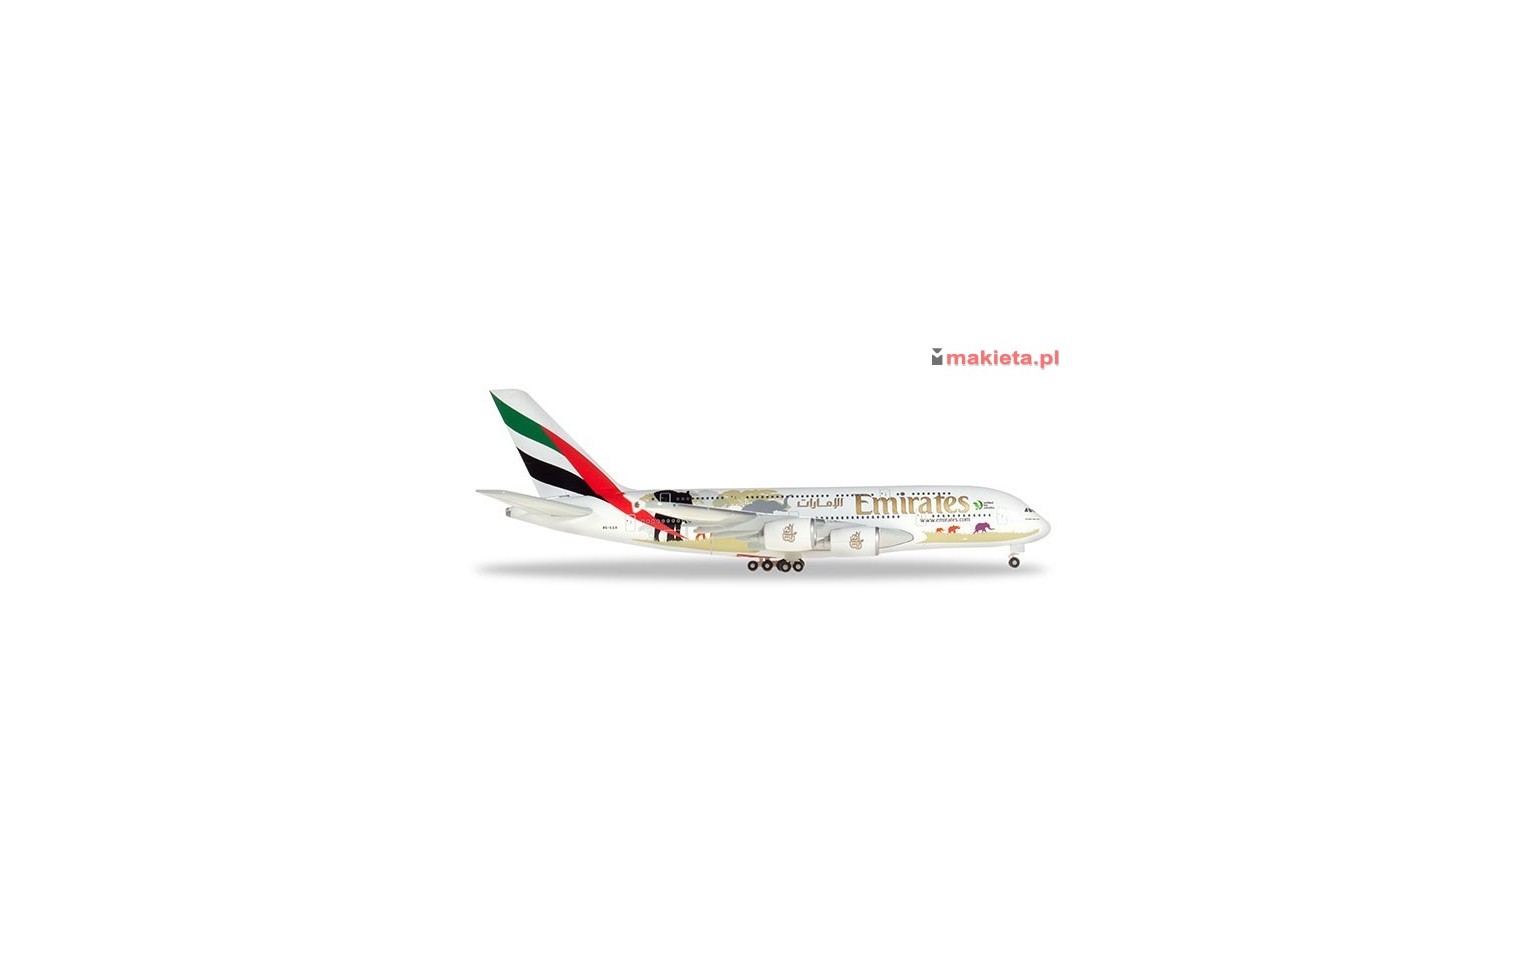 HERPA 532723, Emirates Airbus A380 "United for Wildlife", skala 1:500.